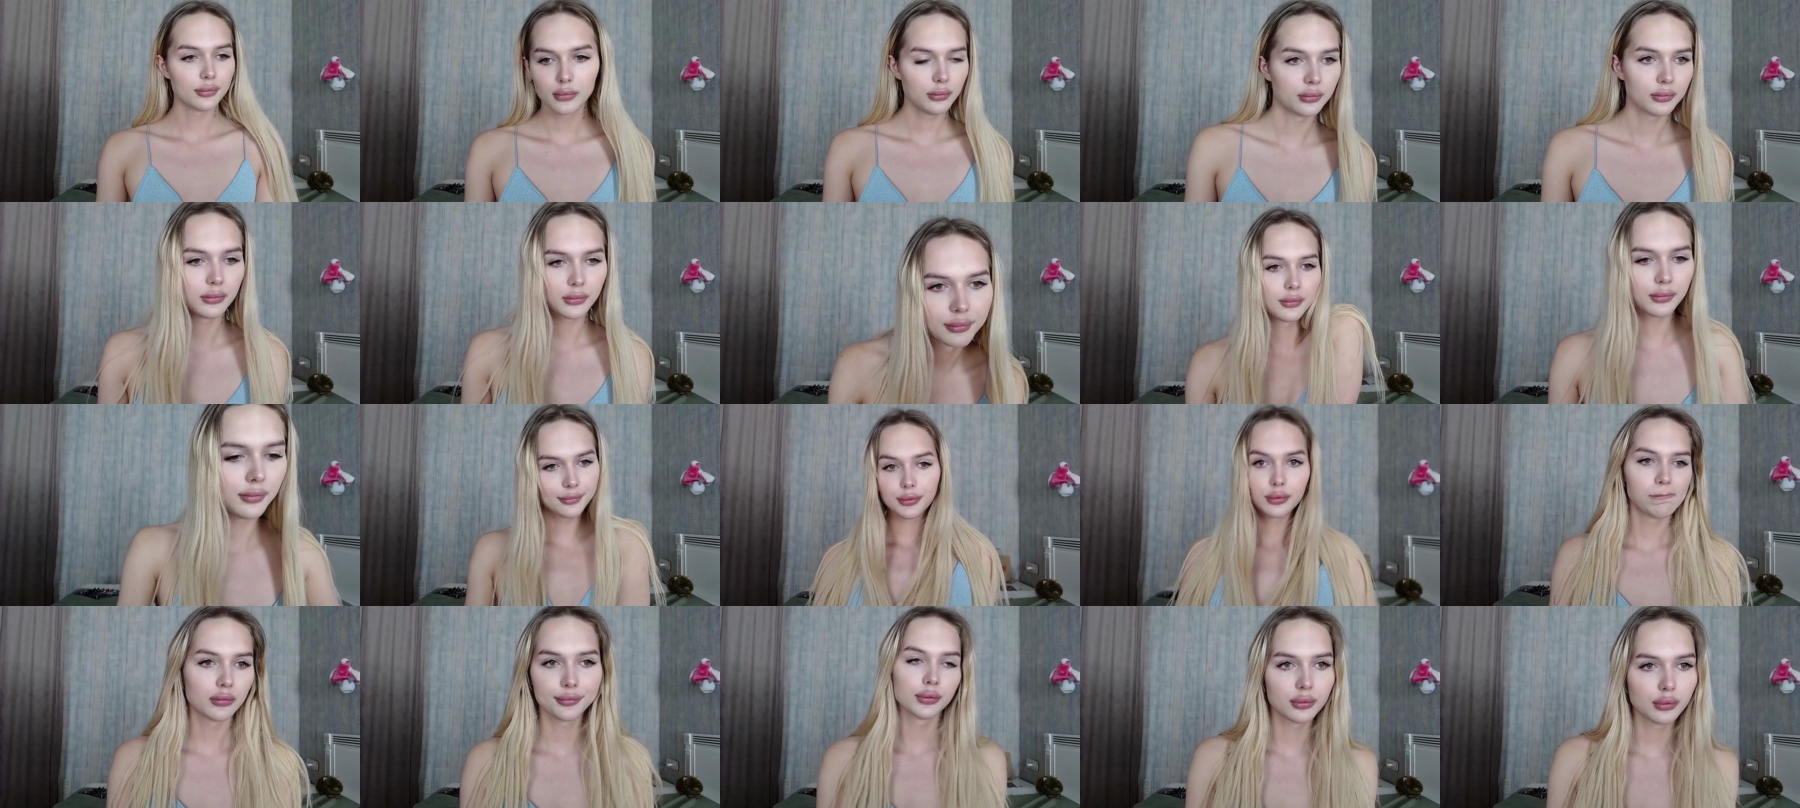 Fairy_Bamby Video CAM SHOW @ Chaturbate 06-08-2021